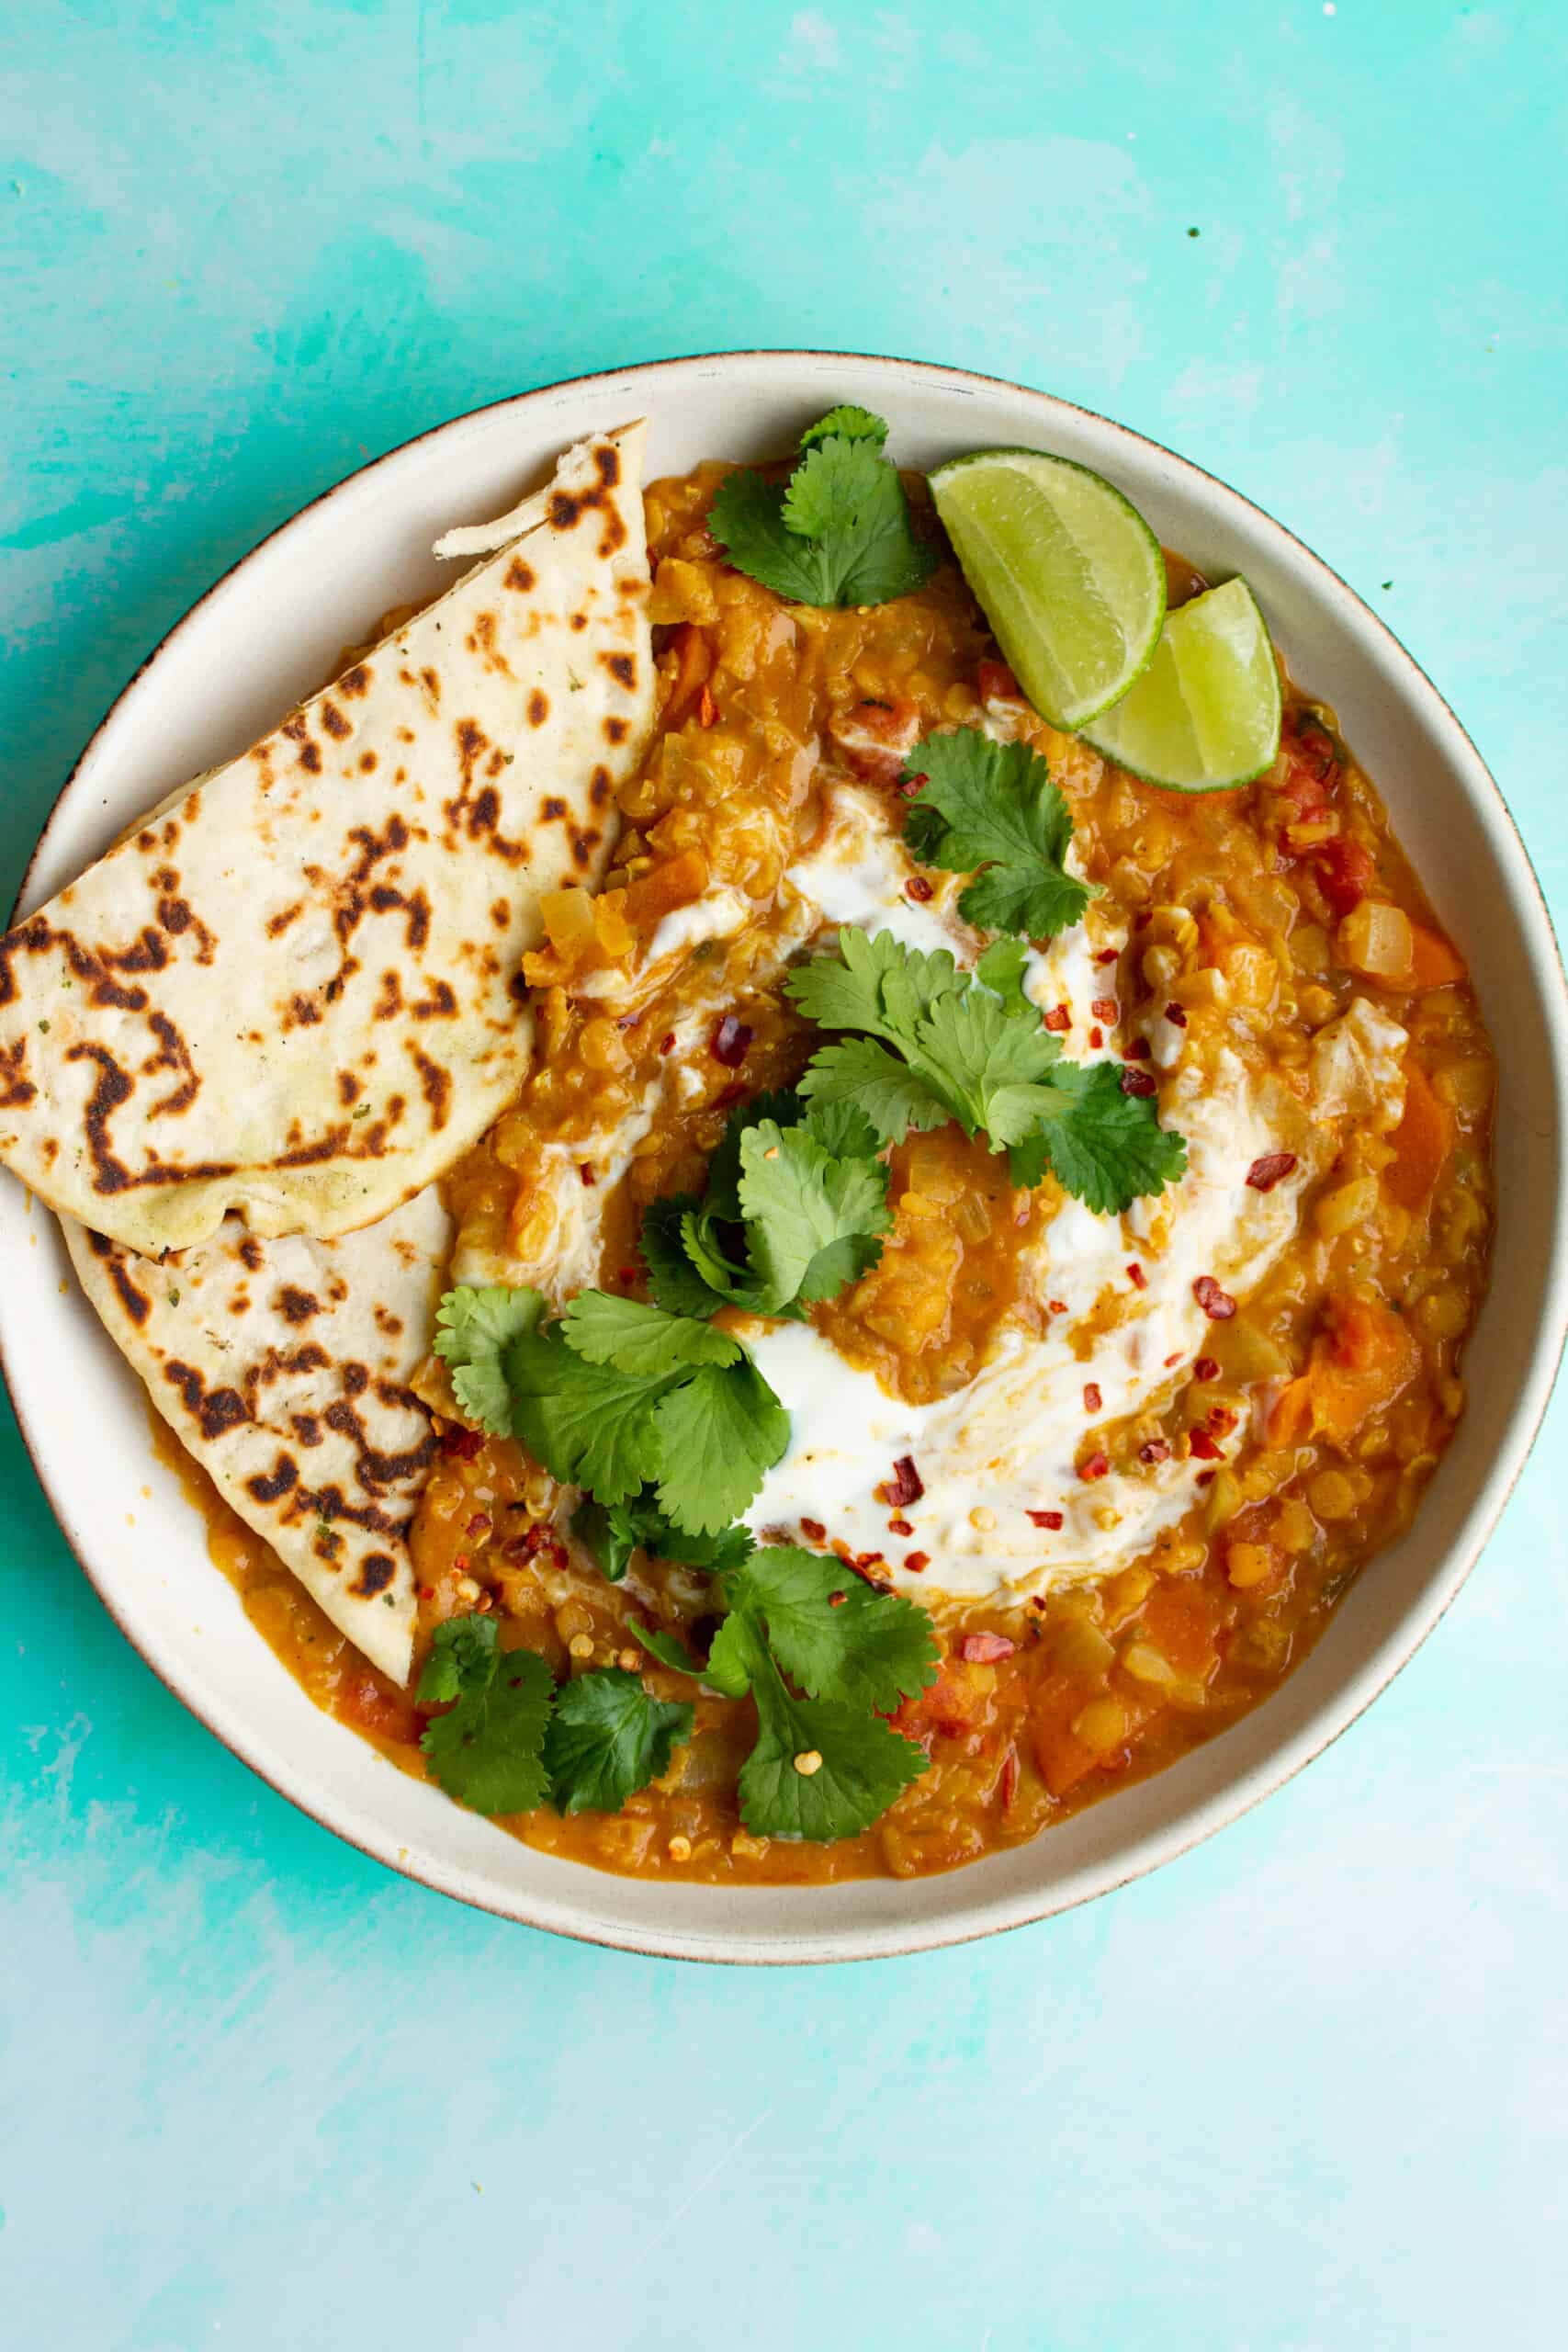 Red Lentil Dahl Curry Recipe with Cuisinart Multi Cooker